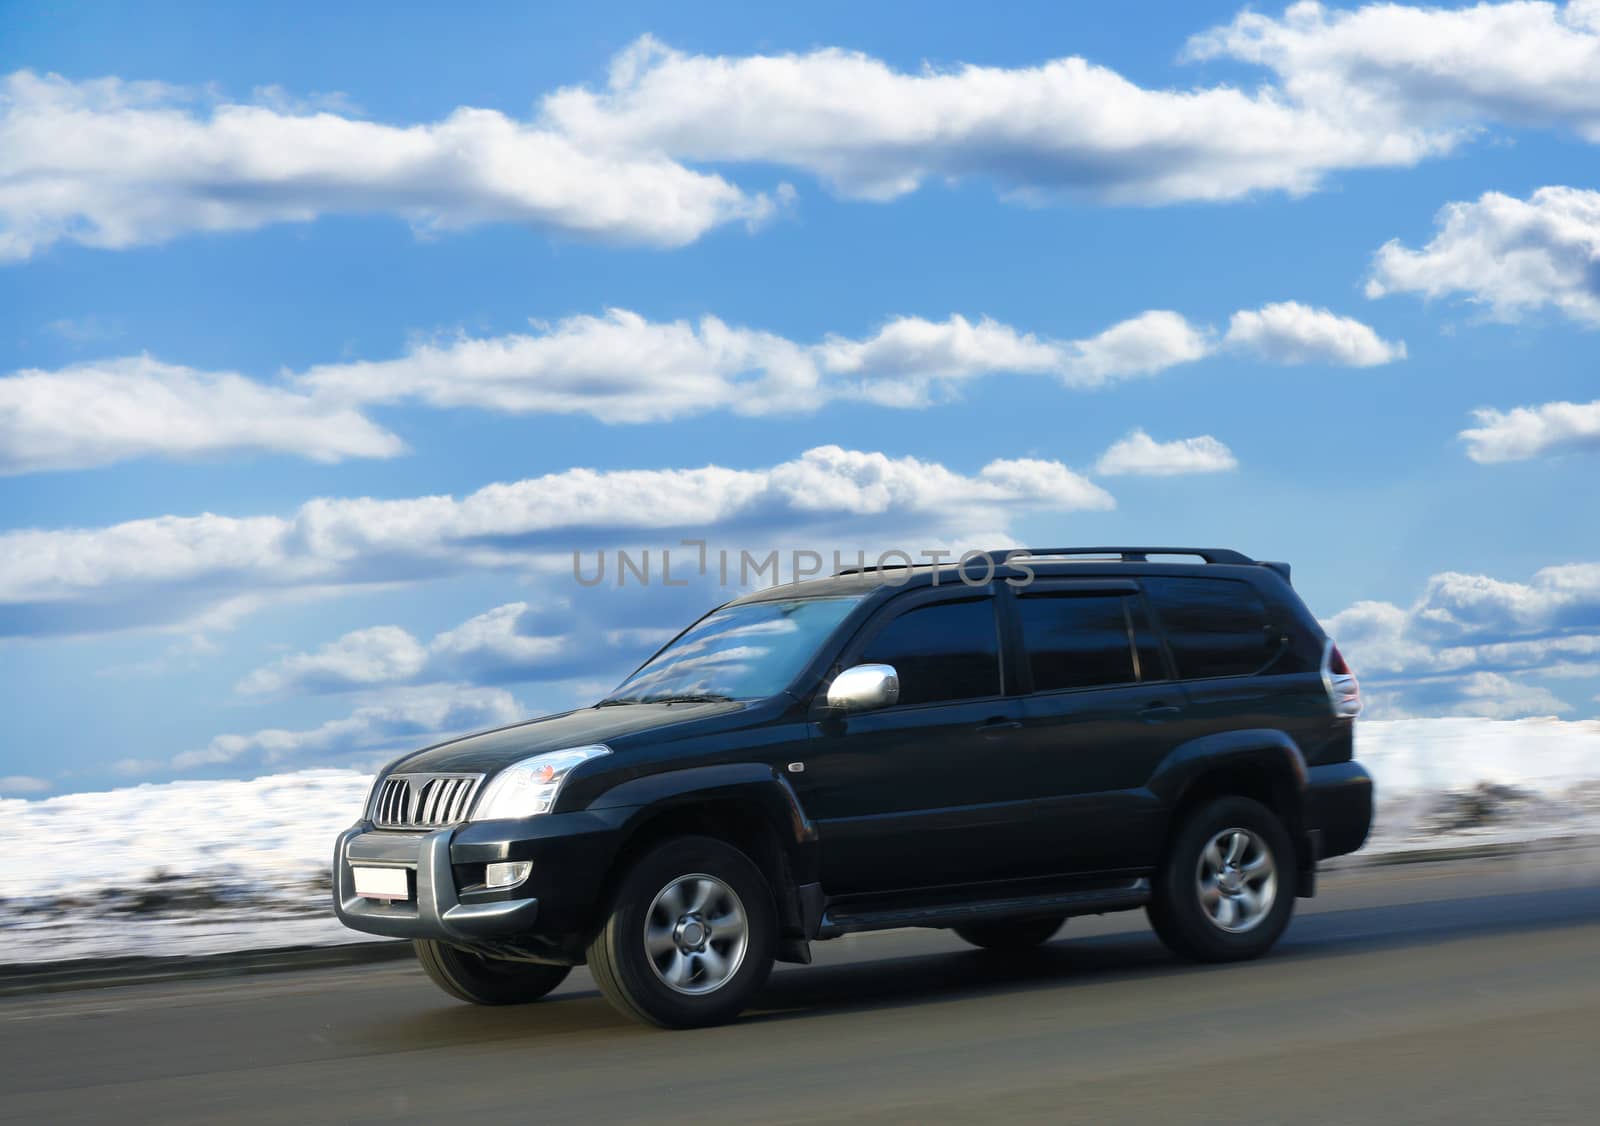 SUV goes on winter road against clear cloudy sky